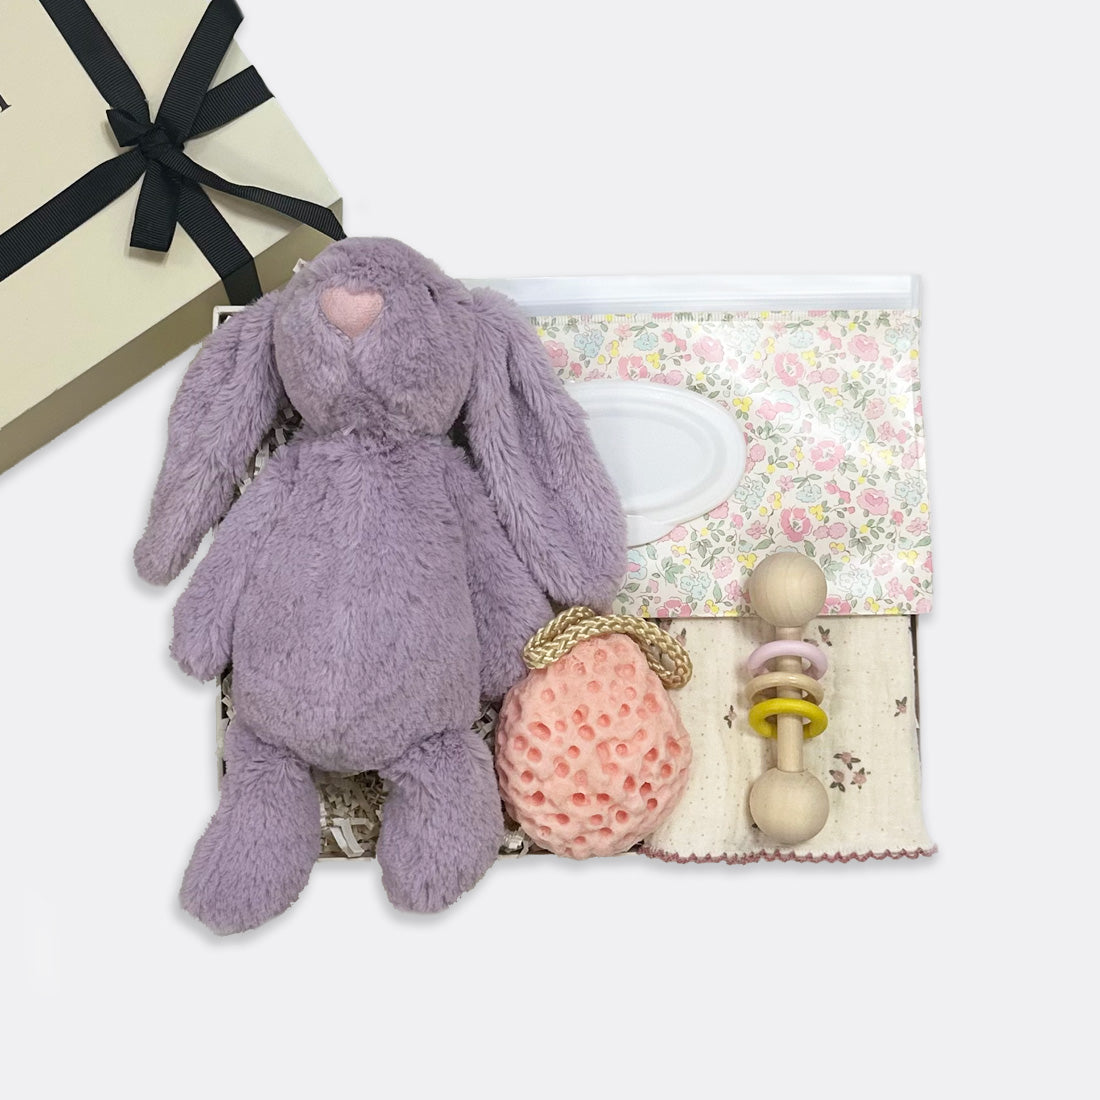 Hun Bun Soft Toy | Lavender Pink Sponge Cottage Chic Muslin Square Wooden Rattle Wet Wipe Pouch | Floral, shop the best Christmas gift gifts for her for him from Inna carton online store dubai, UAE!